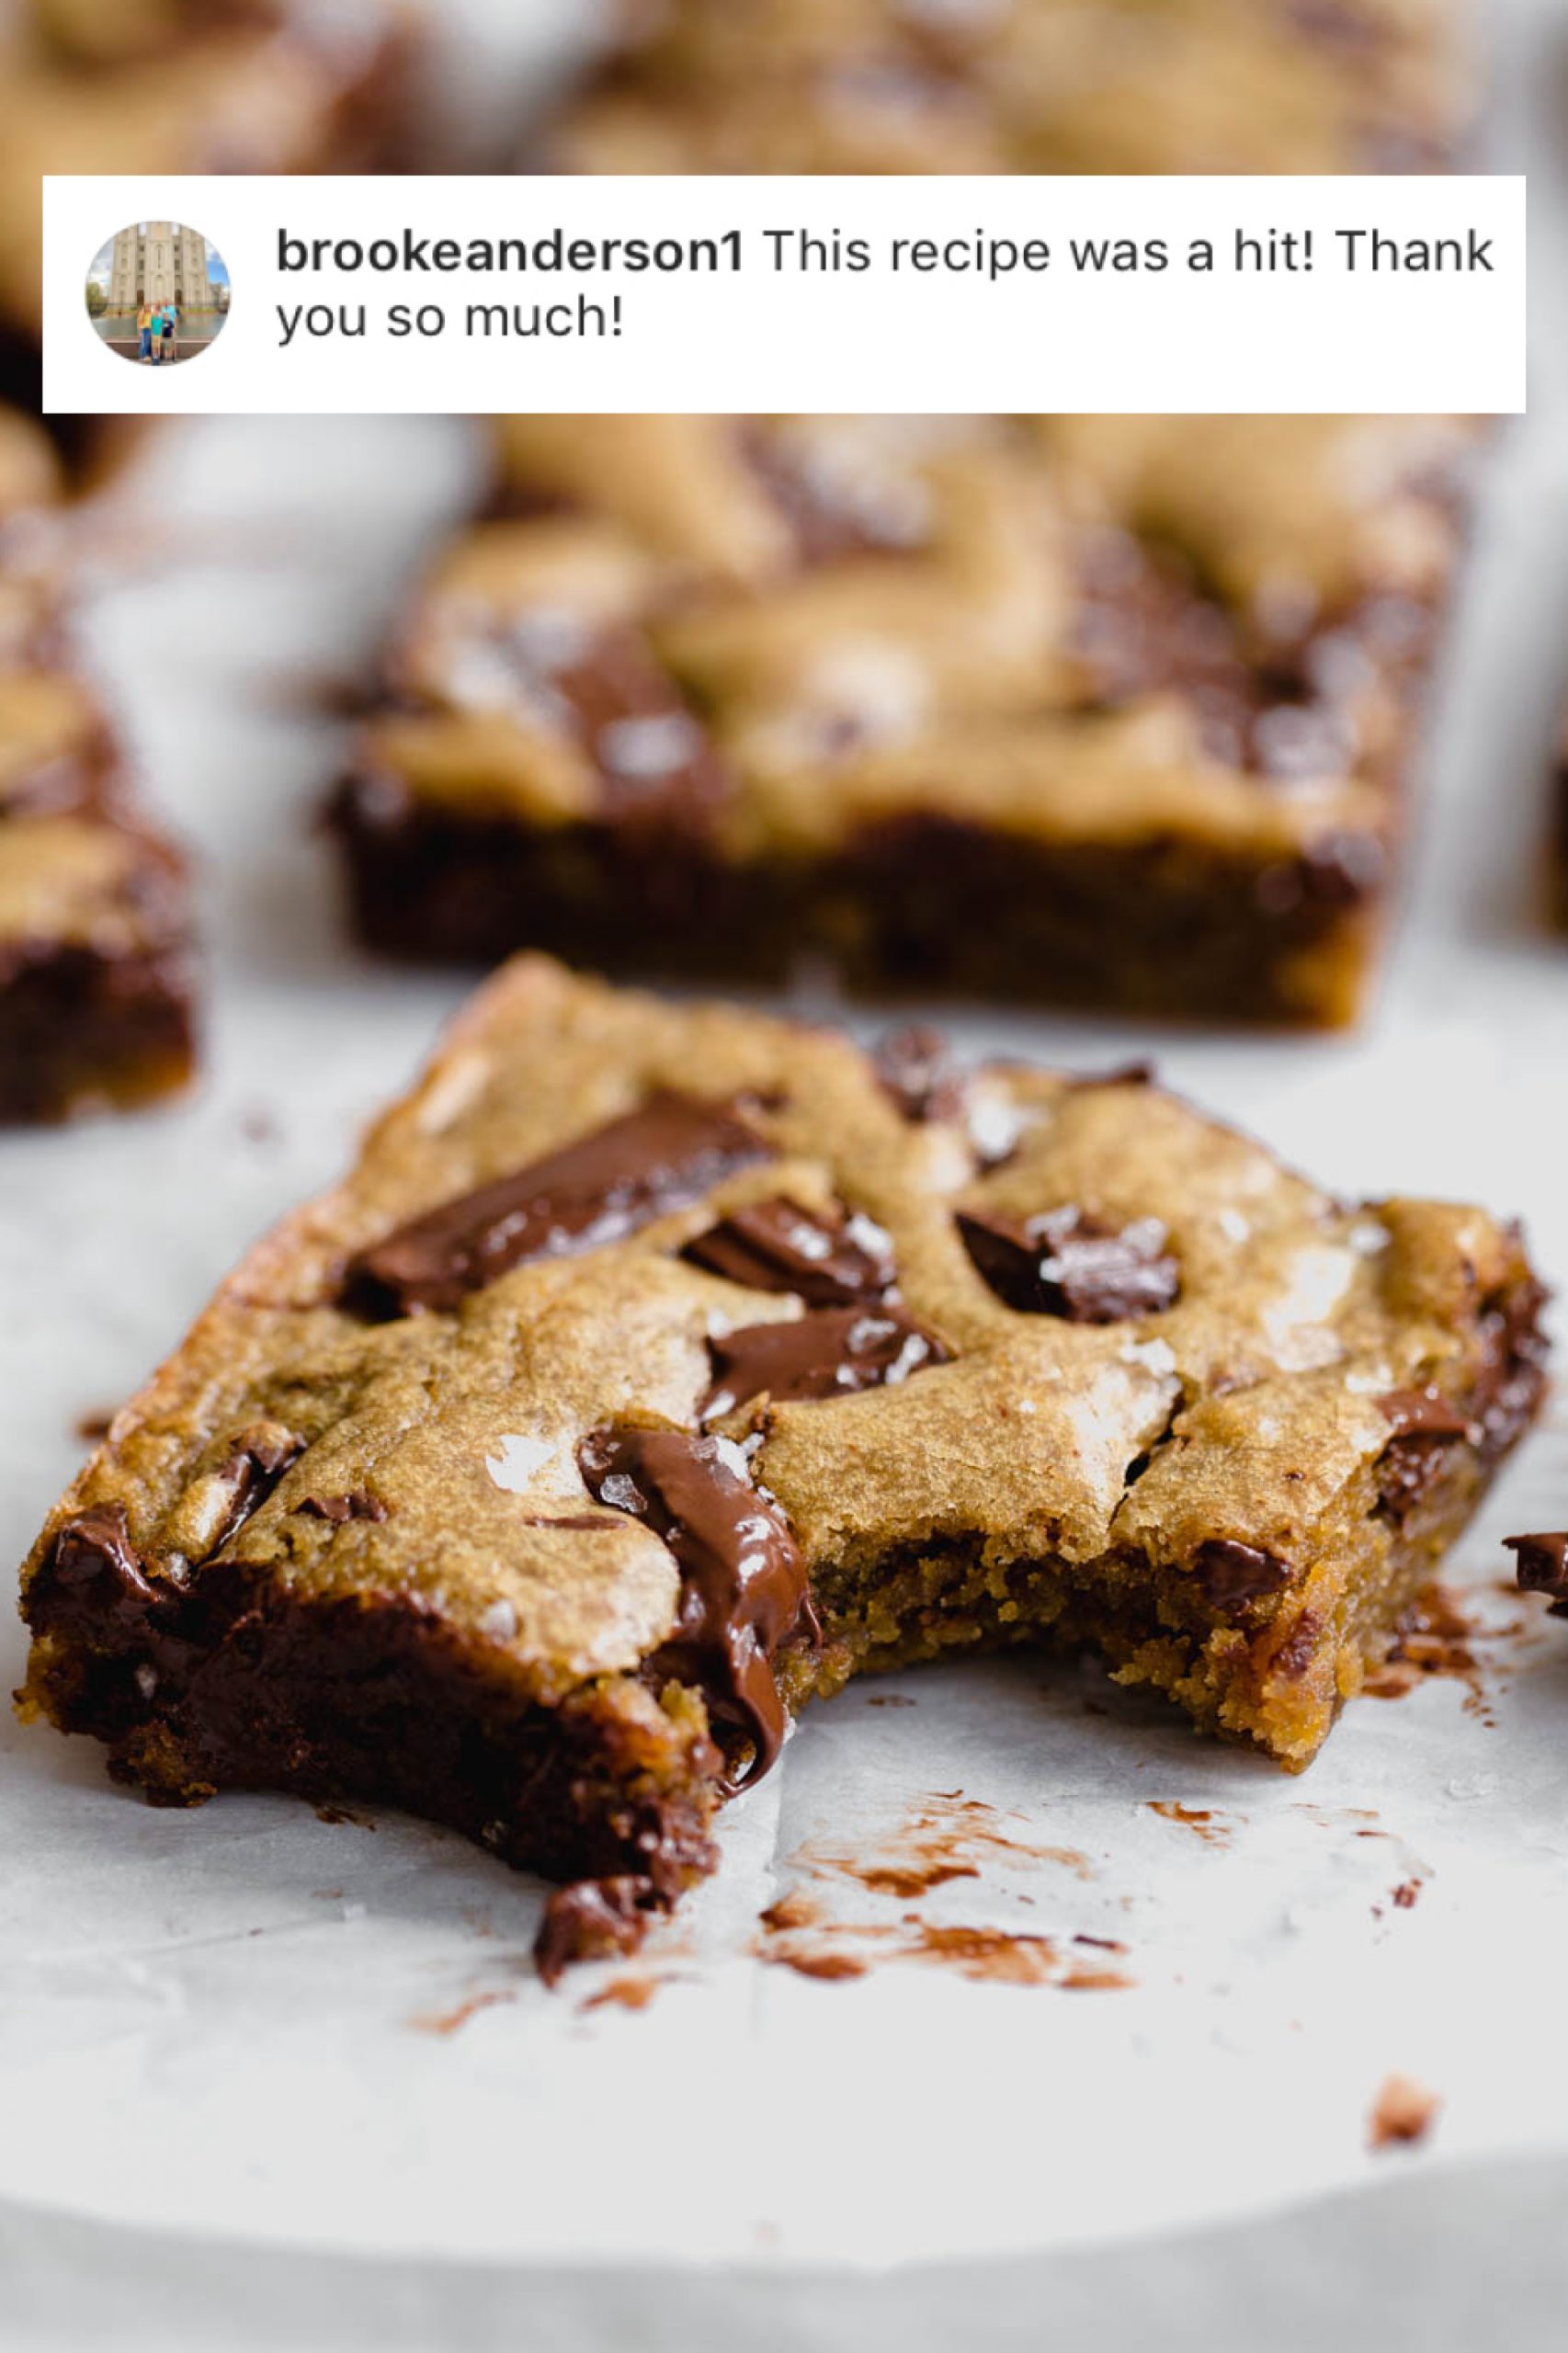 Gooey Chocolate Chunk Blondies with a bite taken out of one. Heavenly easy dessert recipe.